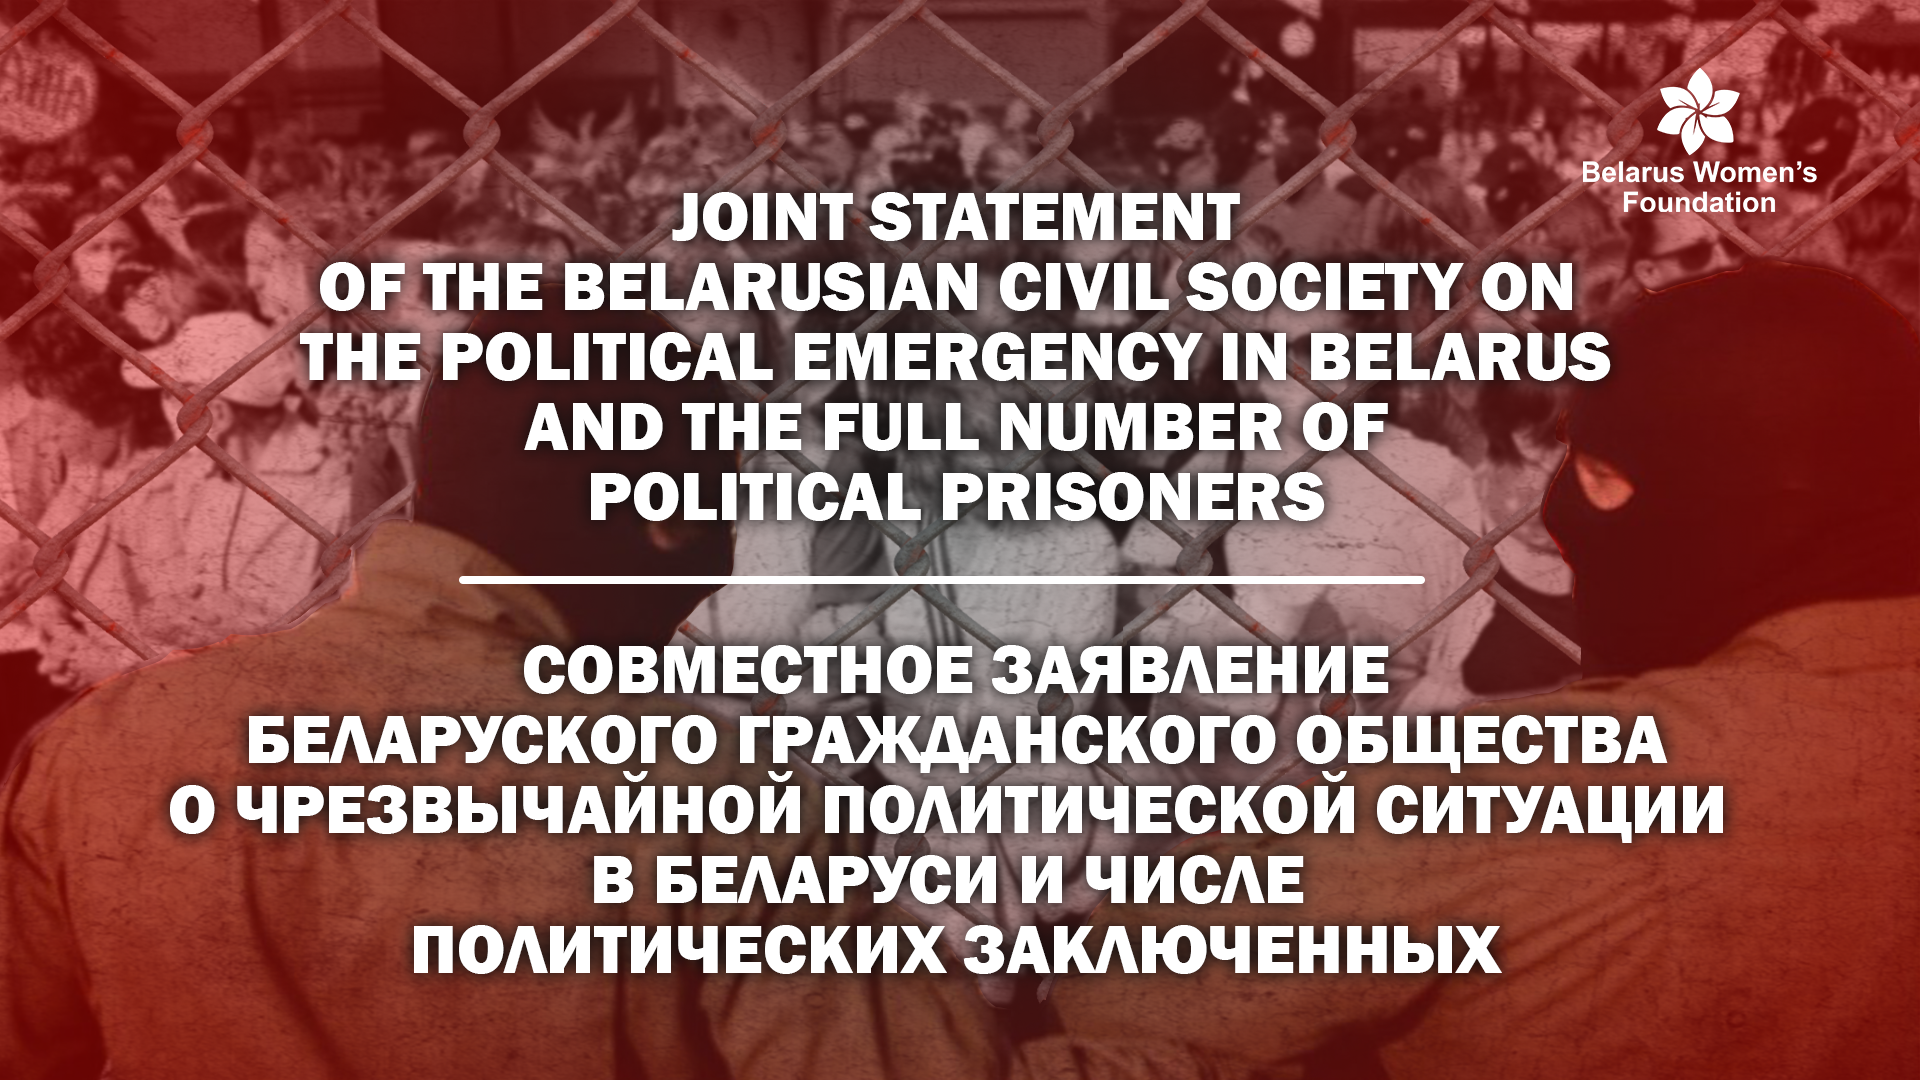 Joint statement of the belarusian civil society on the political emergency in Belarus and the full number of political prisoners